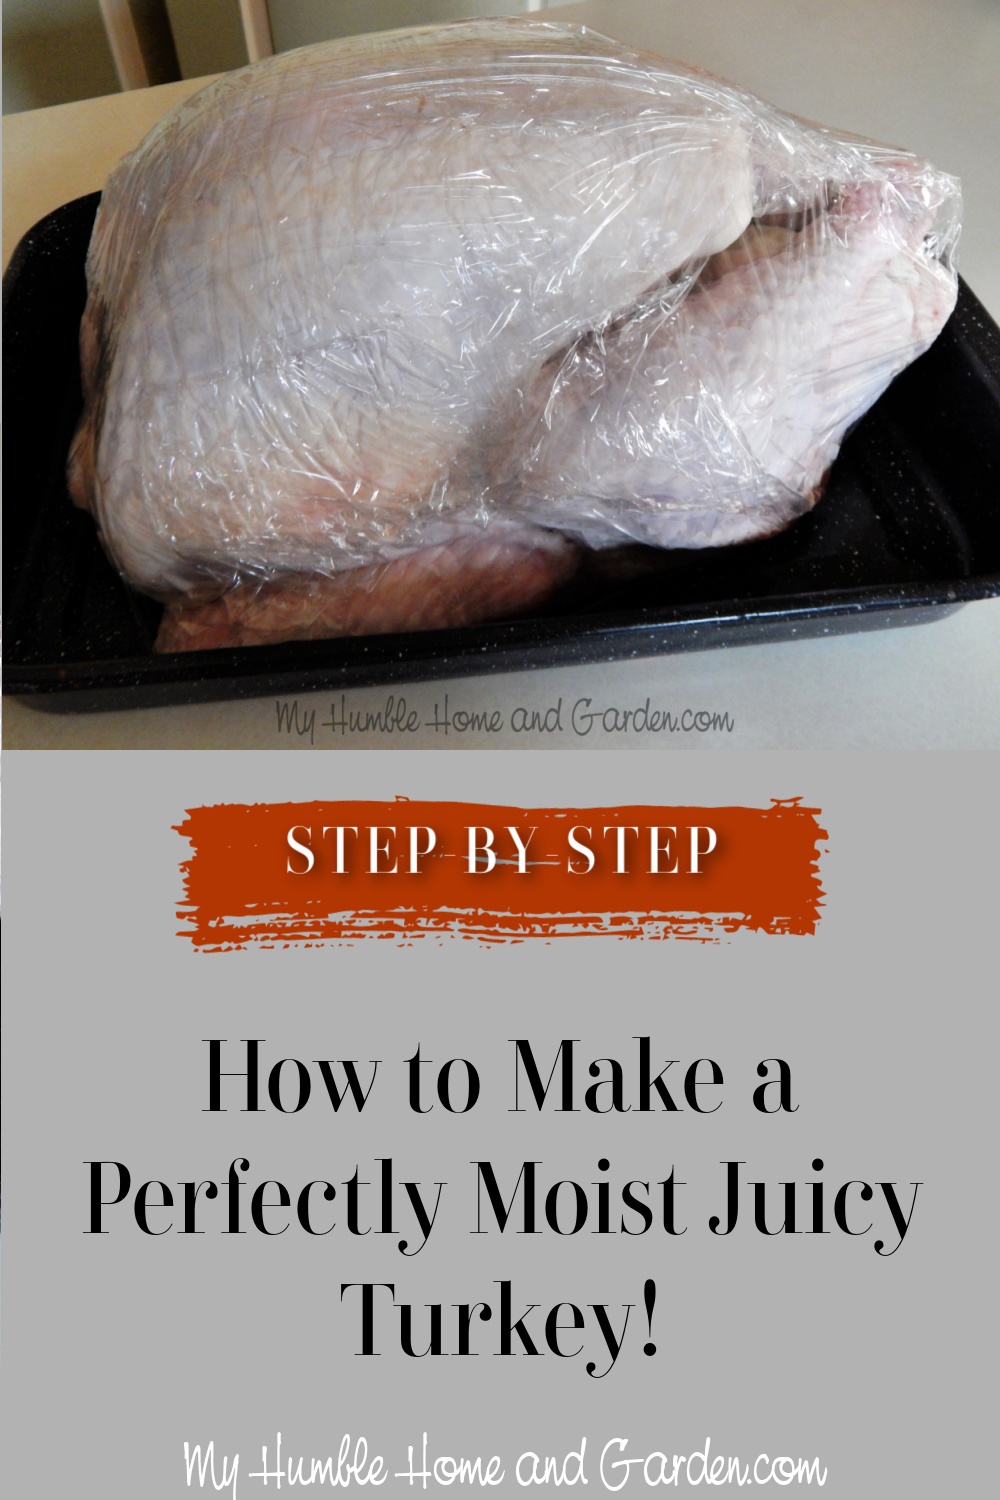 https://myhumblehomeandgarden.com/wp-content/uploads/2021/11/How-To-Make-A-Perfectly-Moist-Juicy-Turkey.jpg